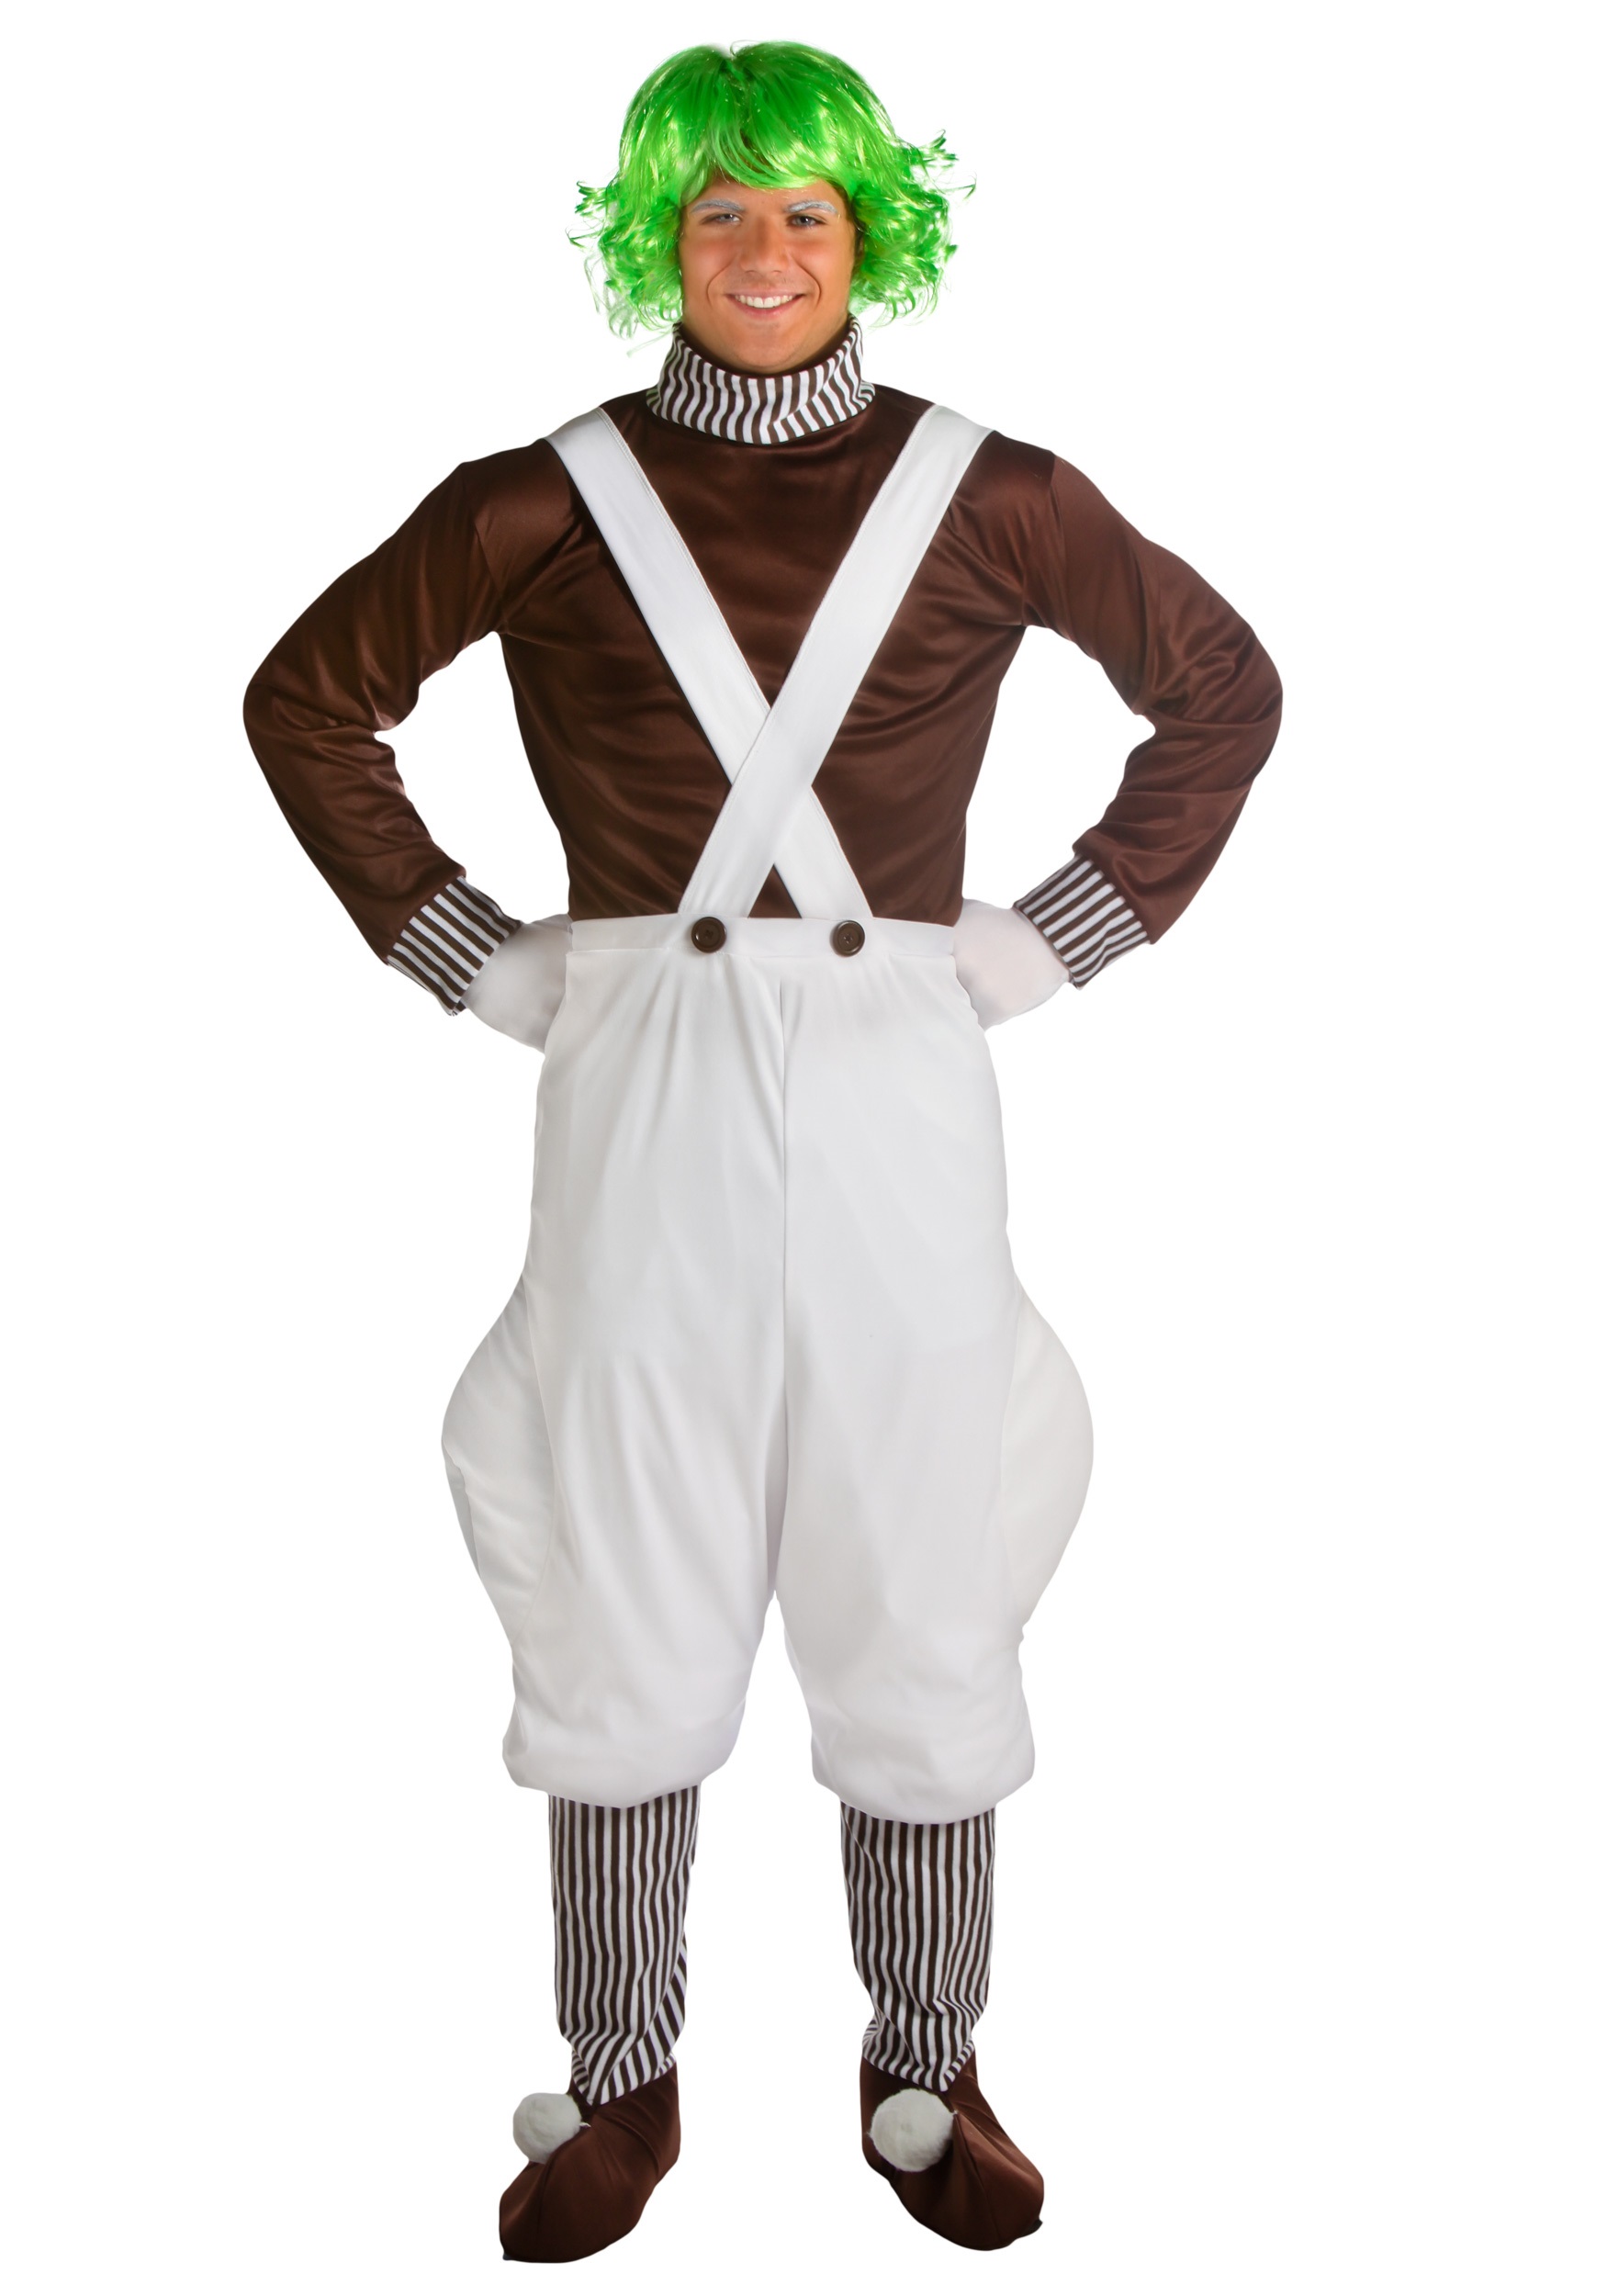 Chocolate Factory Worker Plus Size Costume hq nude image